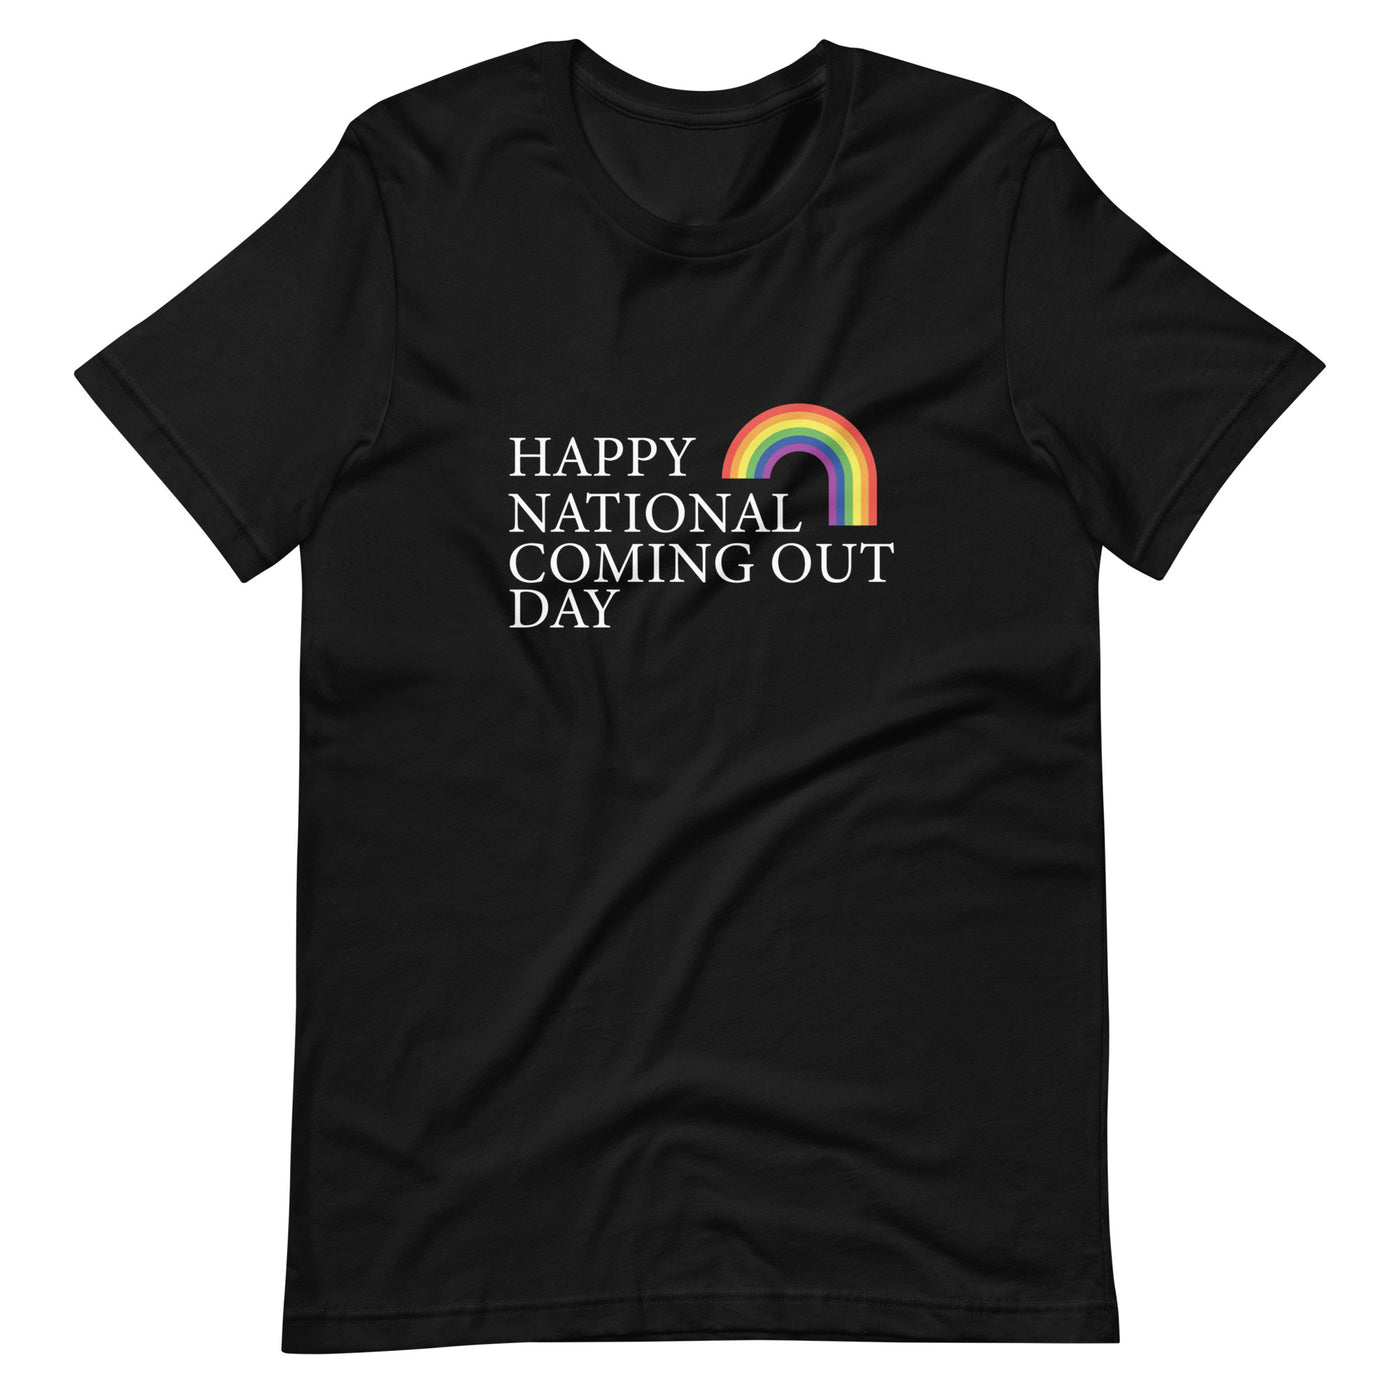 Pride Clothes - Celebrating Love Happy National Coming Out Day Tshirt - Black